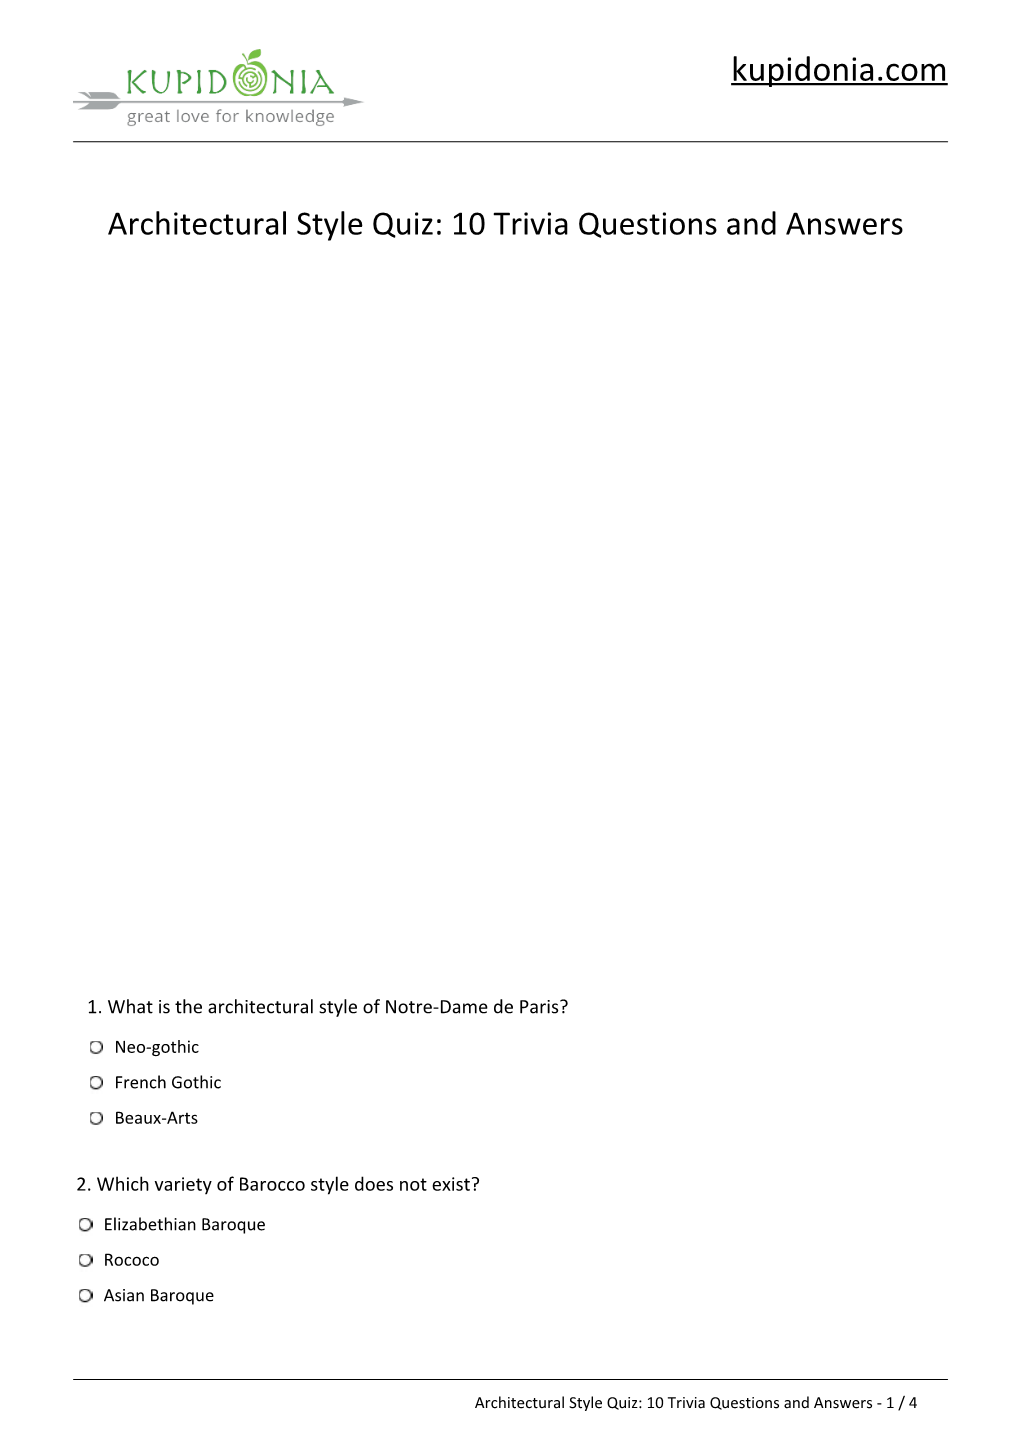 Architectural Style Quiz: Questions and Answers